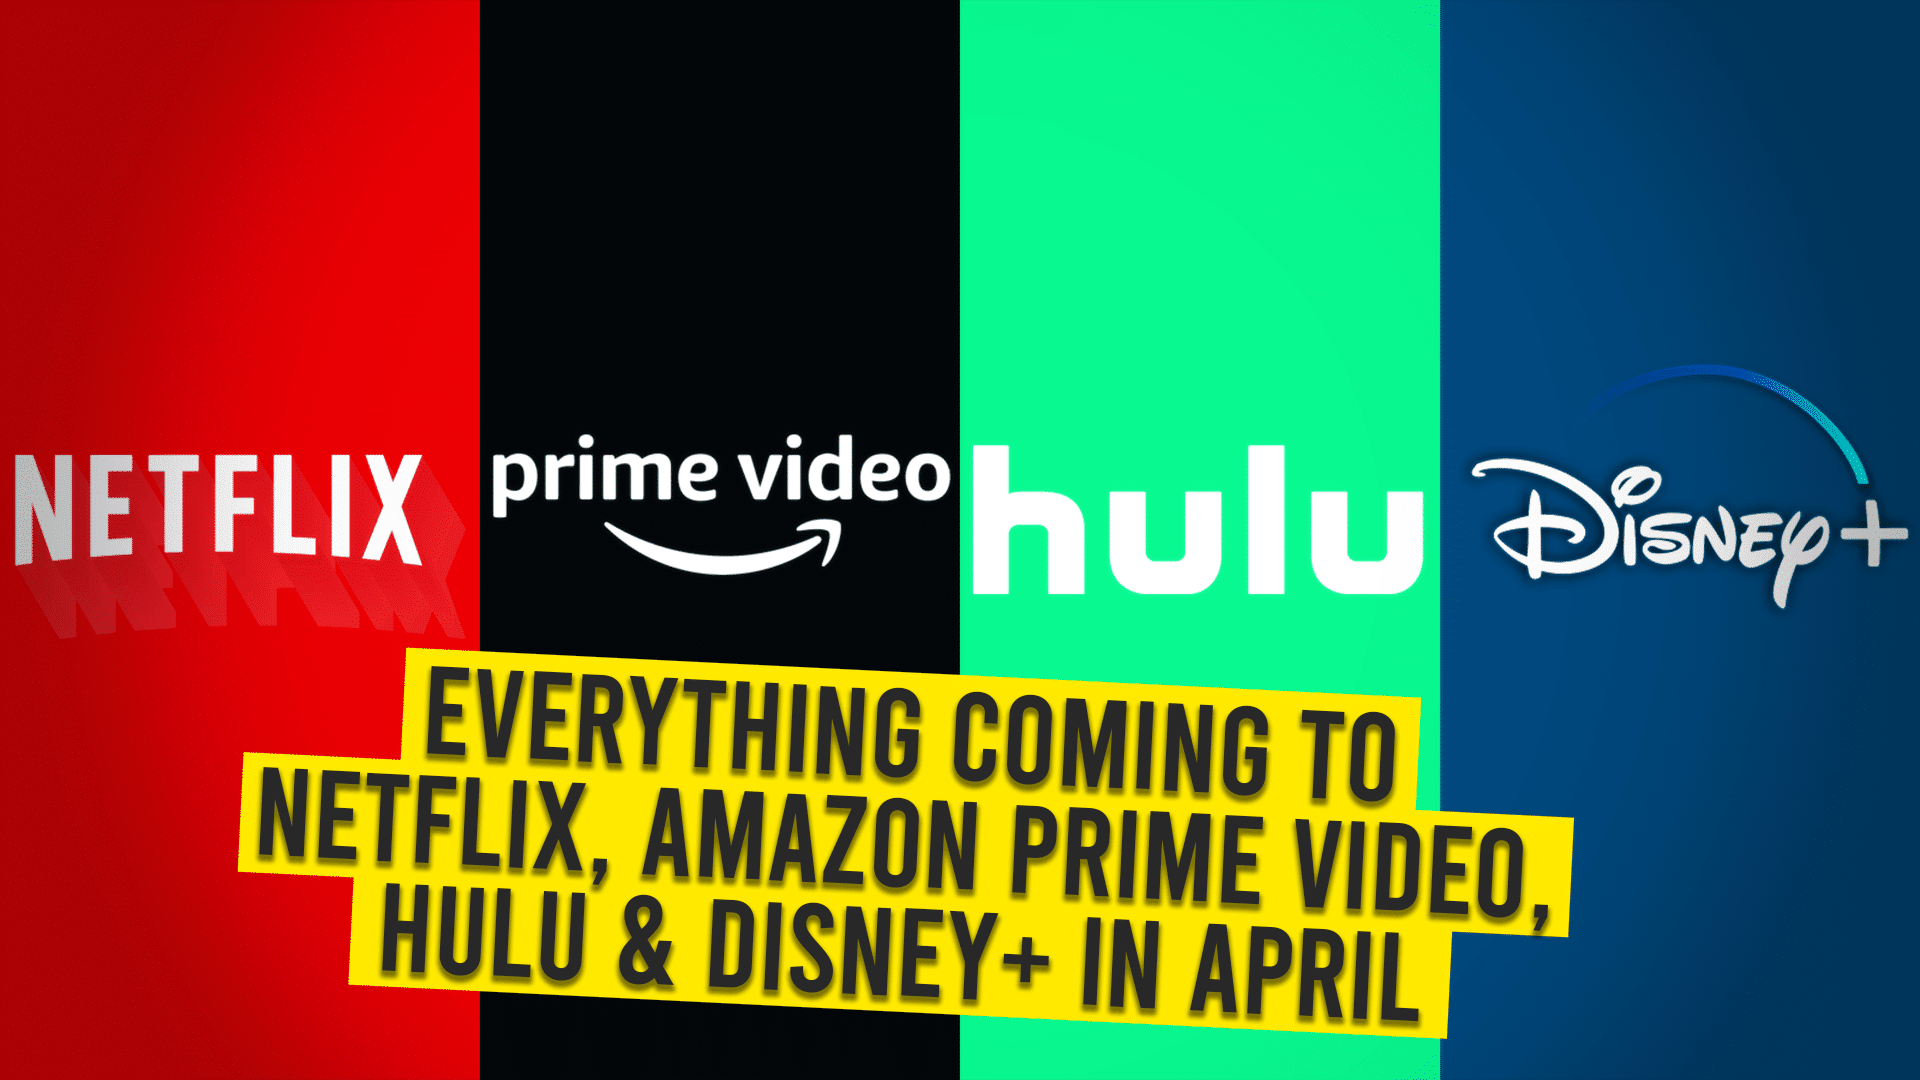 Upcoming series on streaming services